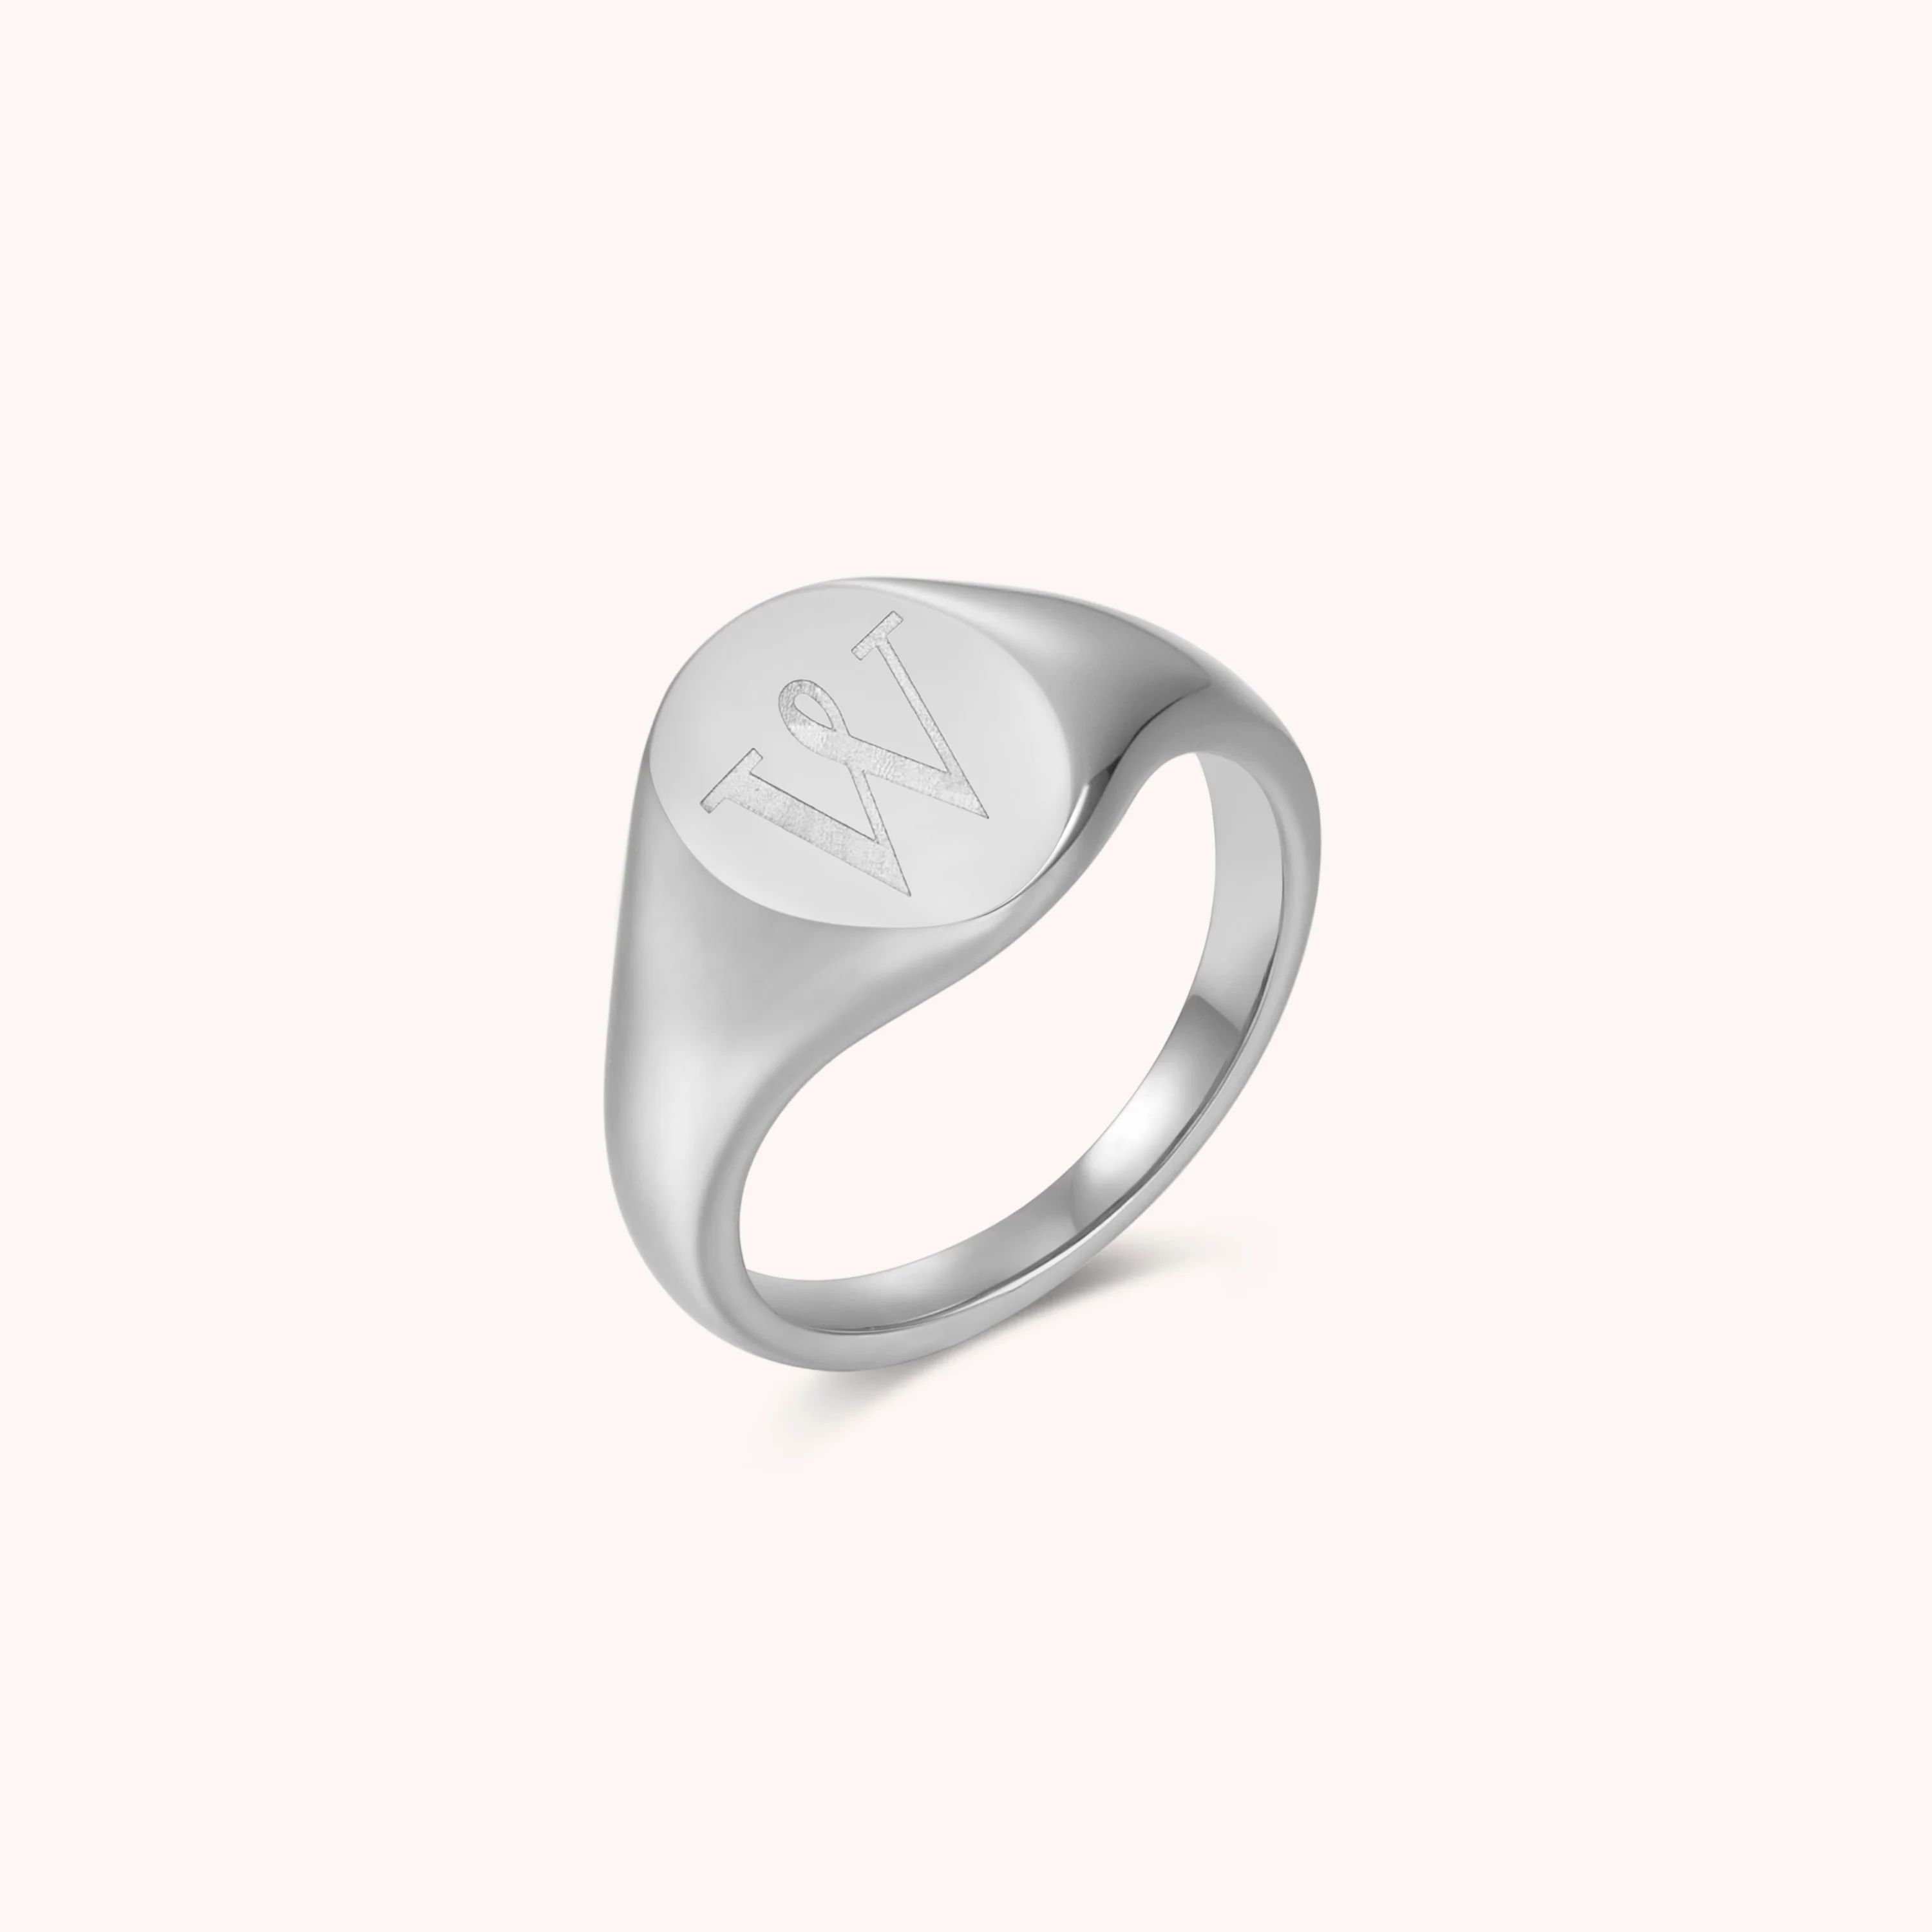 Initial Signet Ring - W | Victoria Emerson